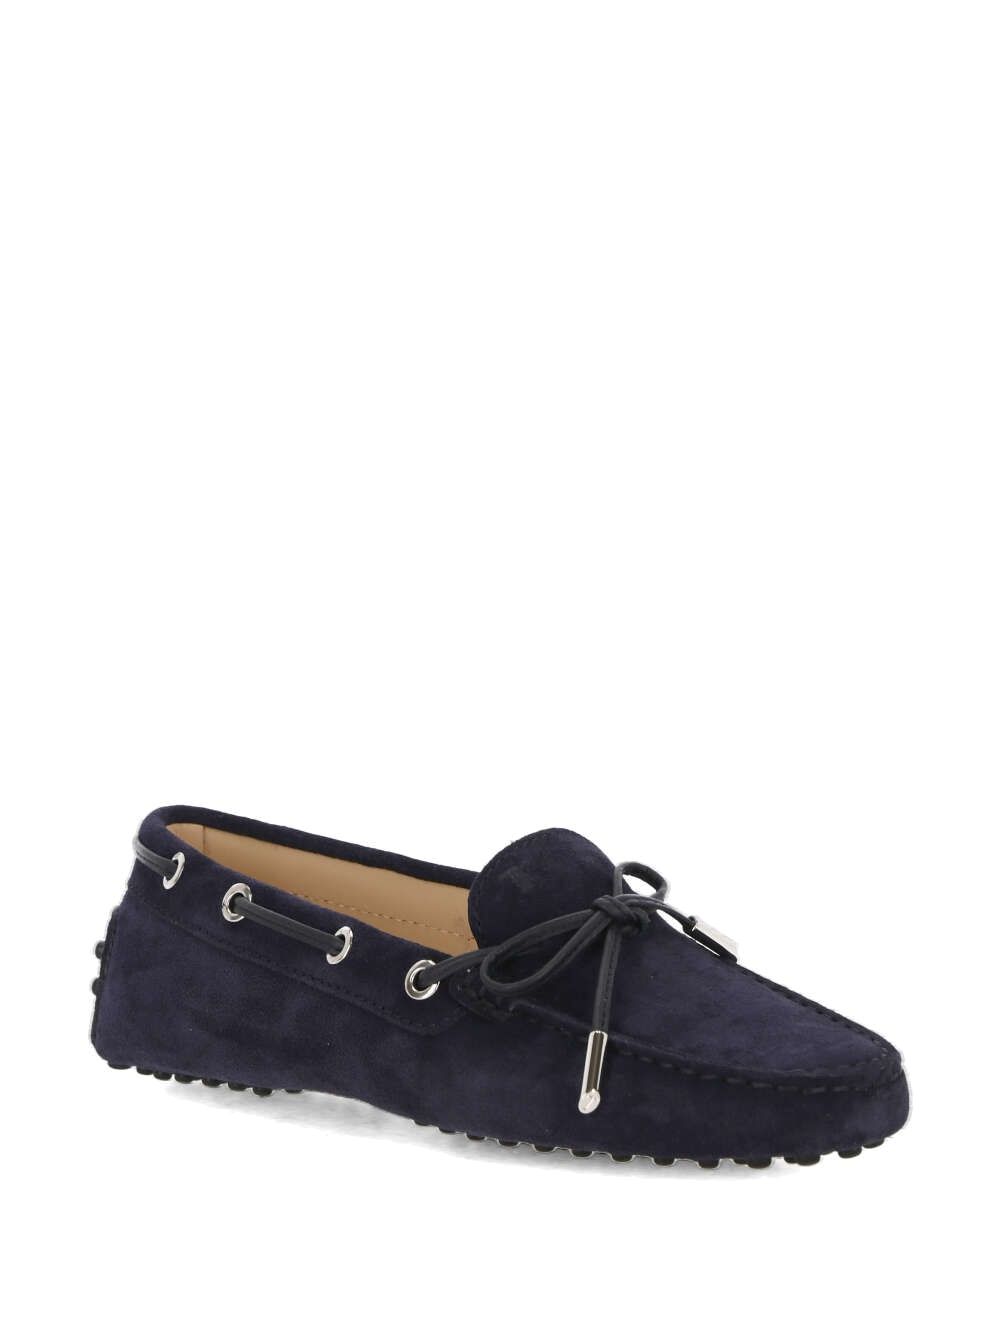 Gommino loafers in dark blue suede